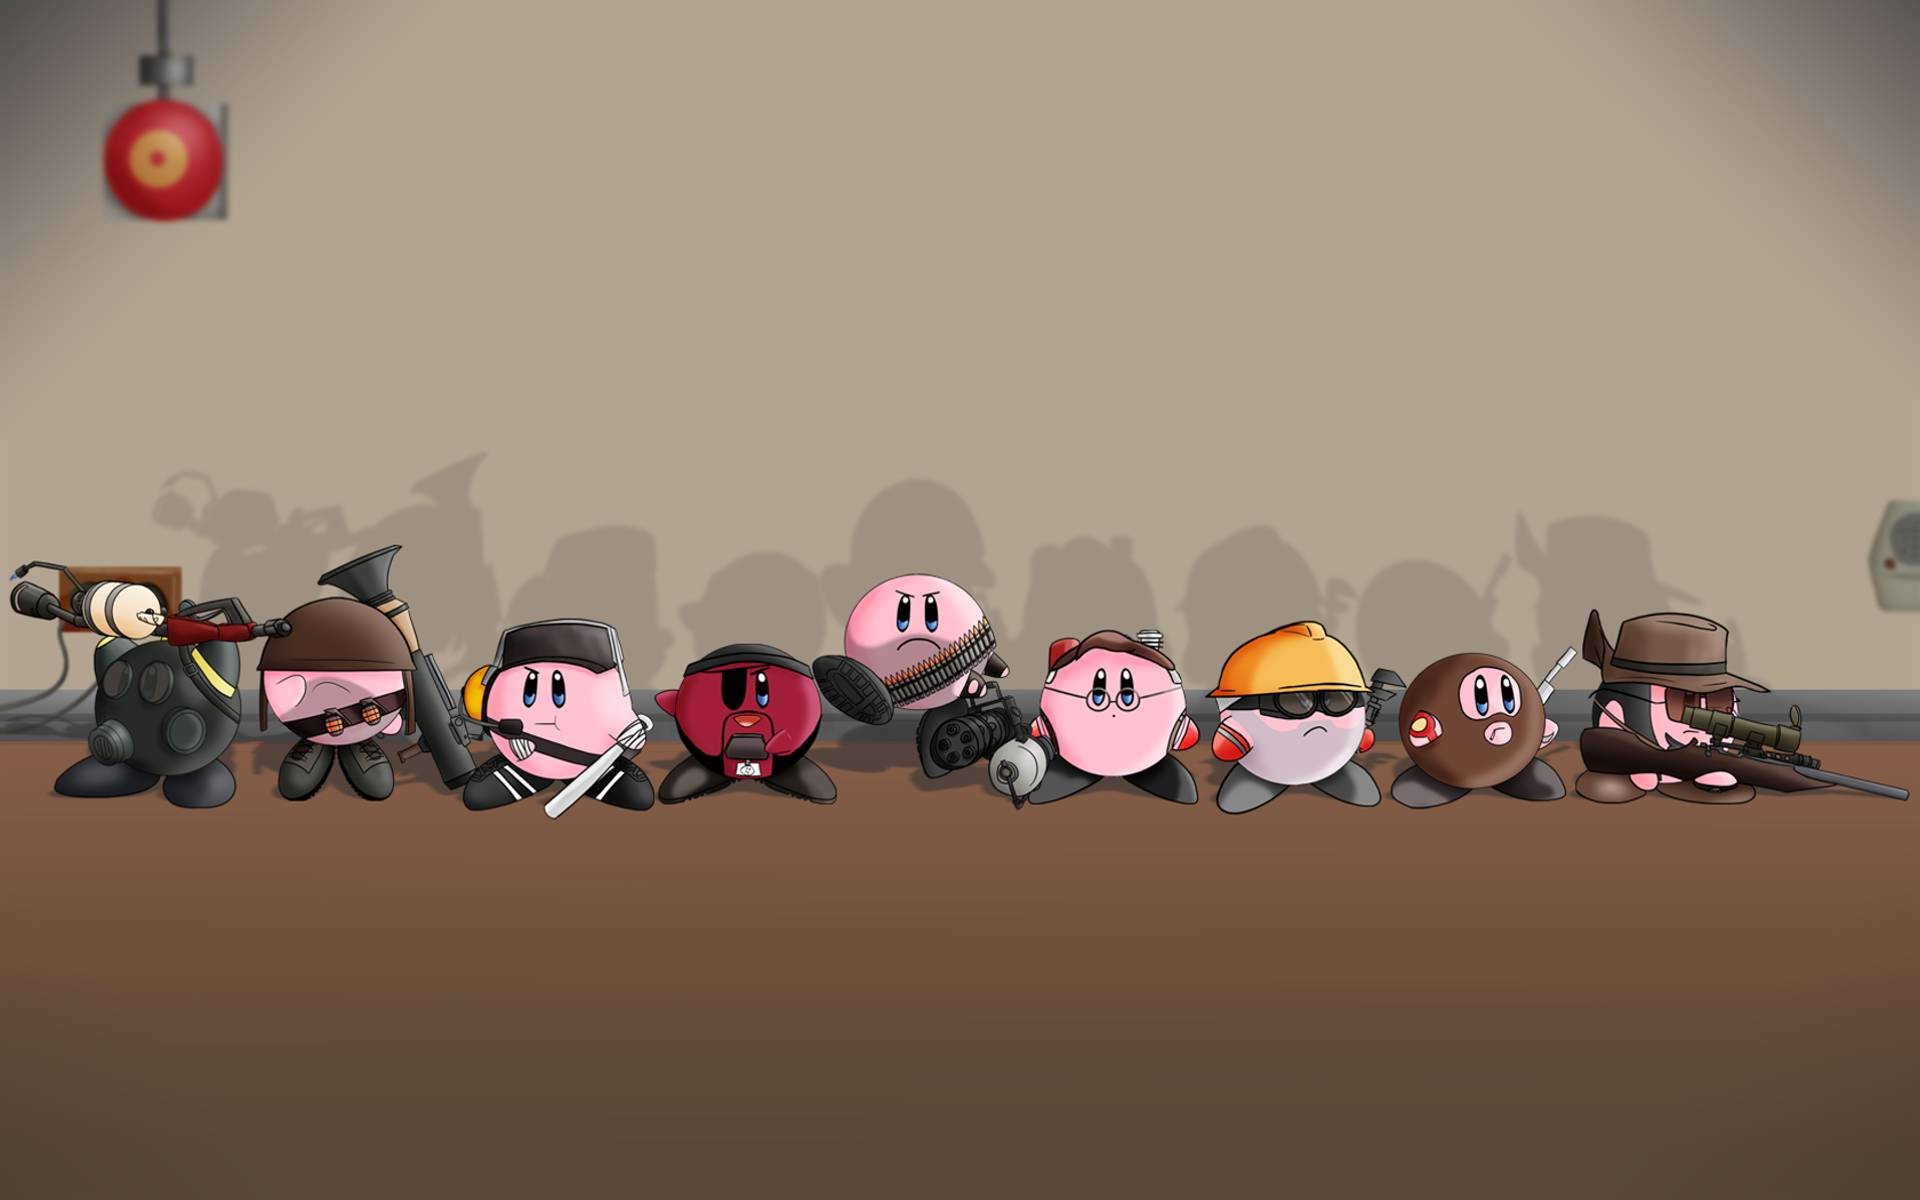 5120x1440p 329 team fortress 2 image